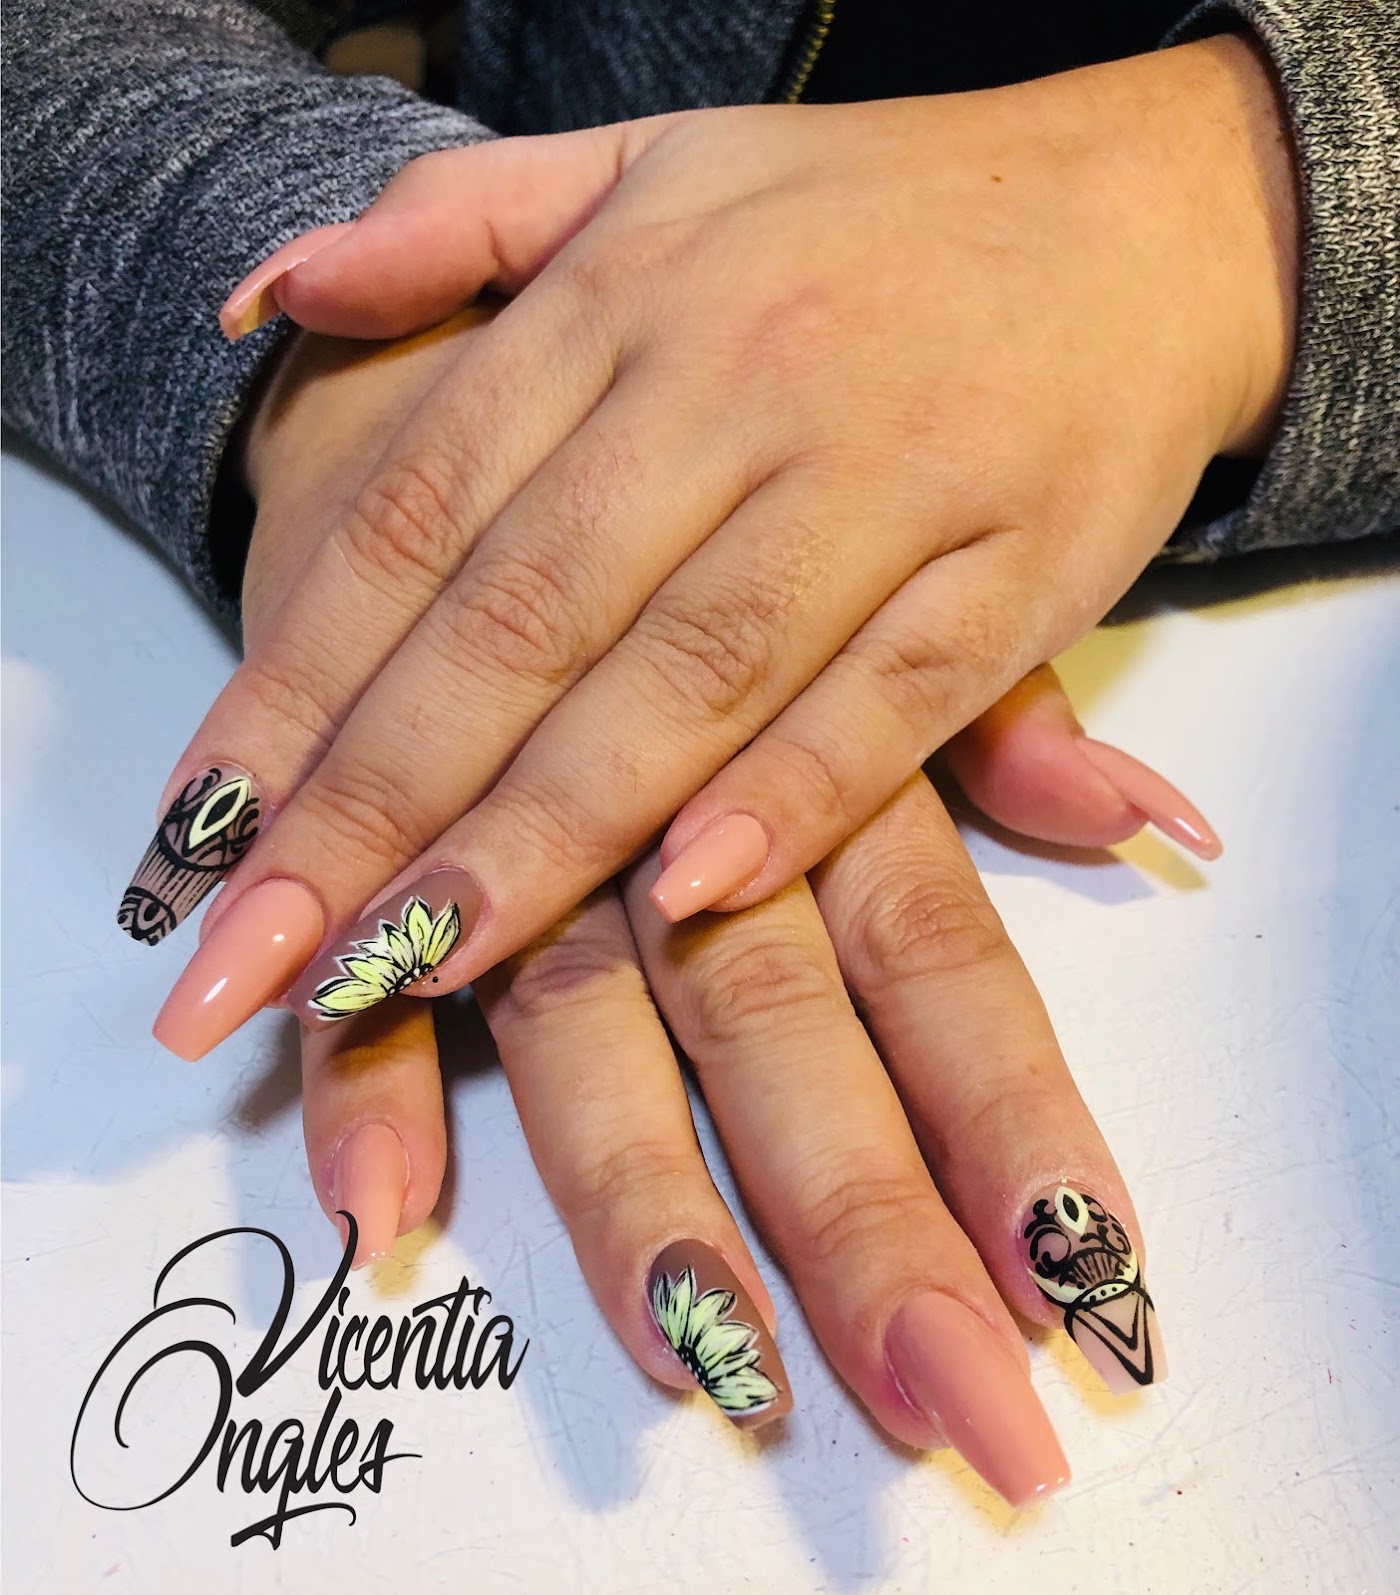 Vicentia Ongles